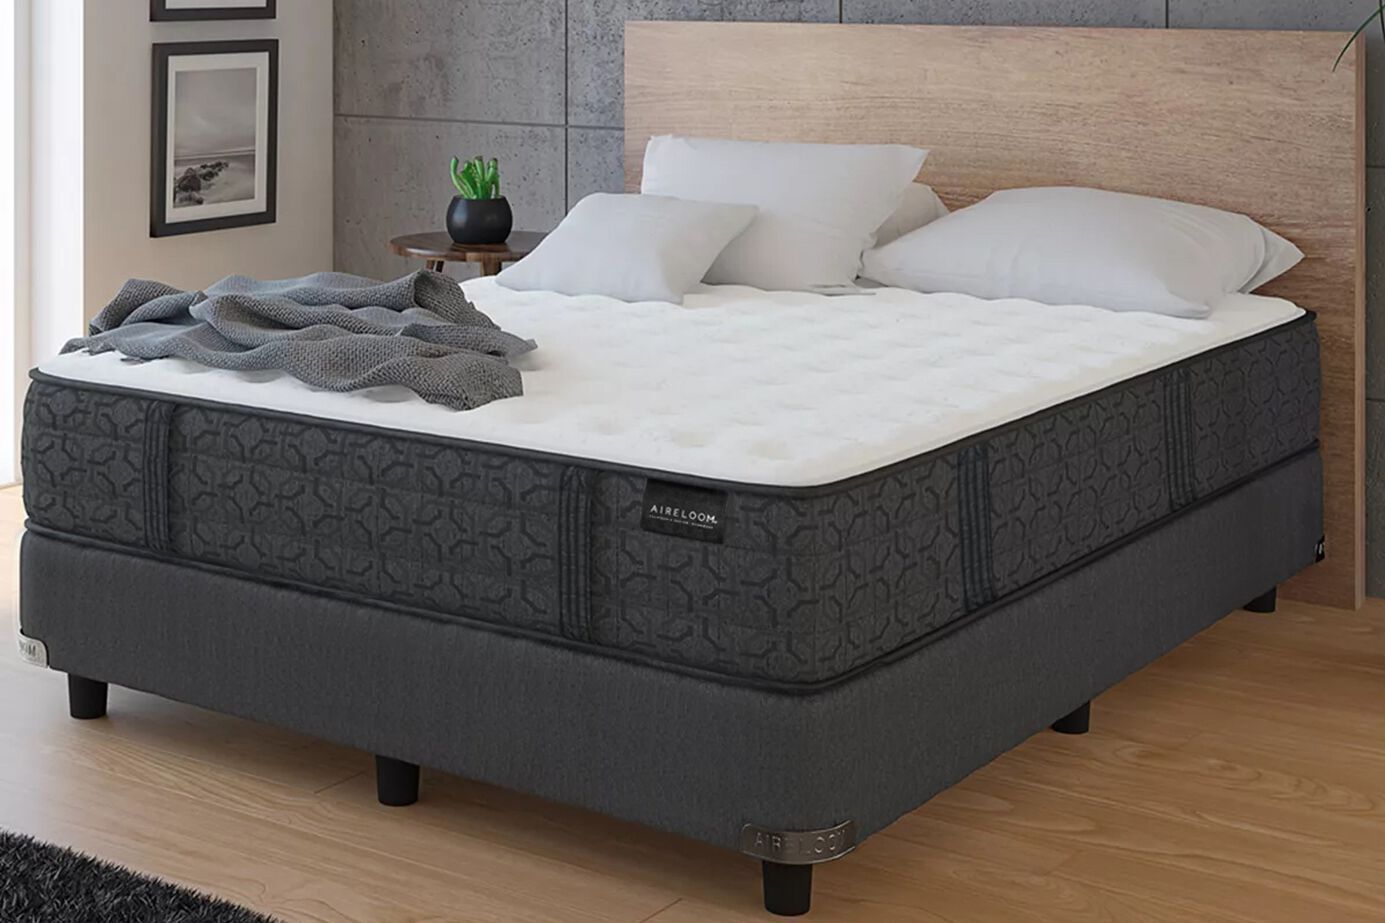 Aireloom Pacific Bay Orion Luxury Firm Mattress 12.5" image number 0